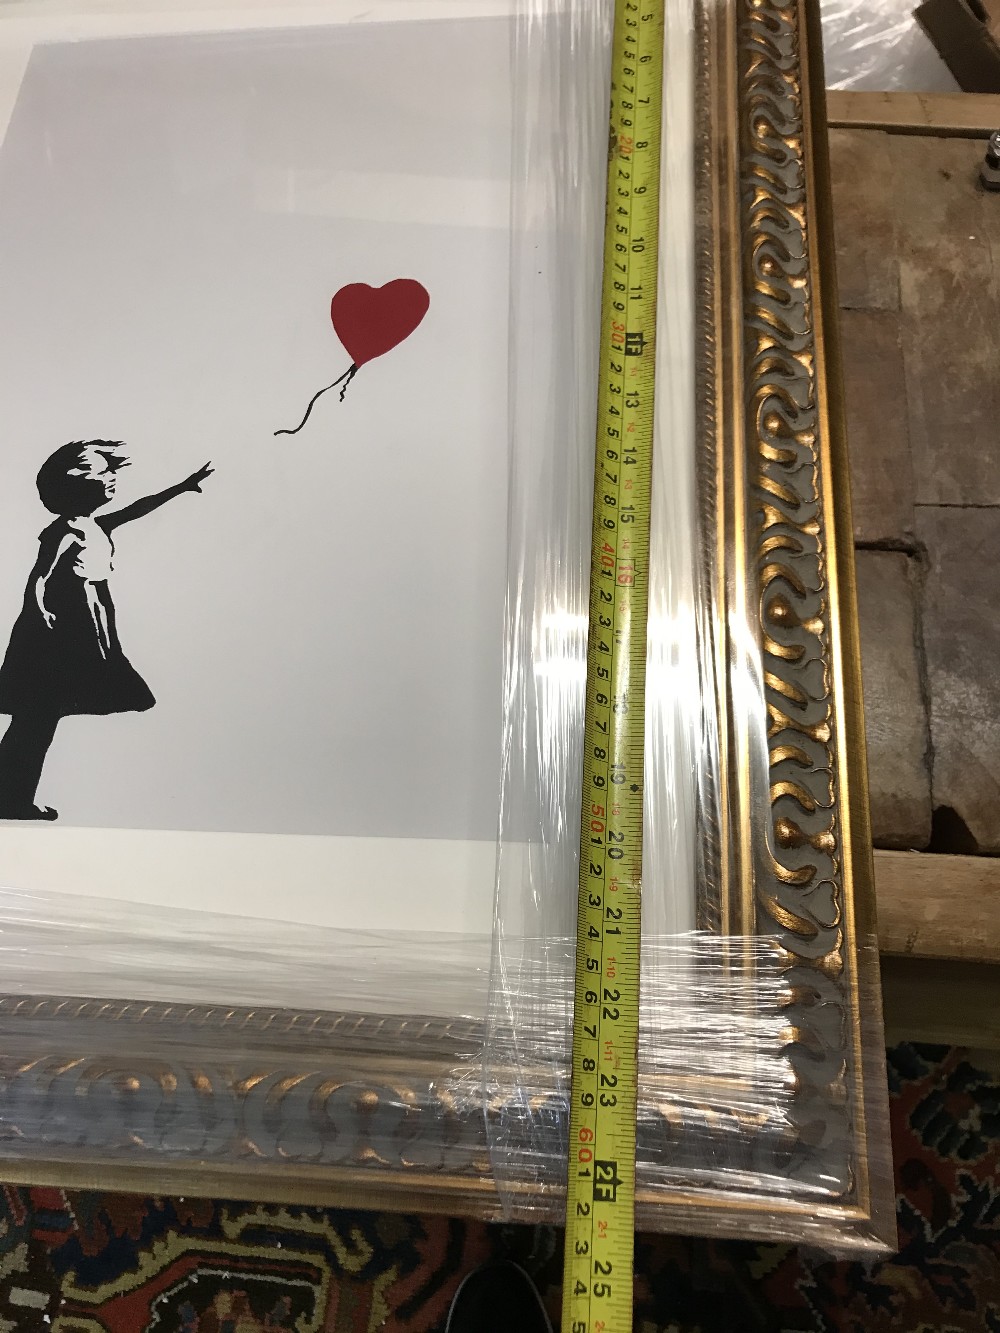 Banksy "Girl With Red Balloon" Lithograph Print , Ornate Framed - Image 2 of 3